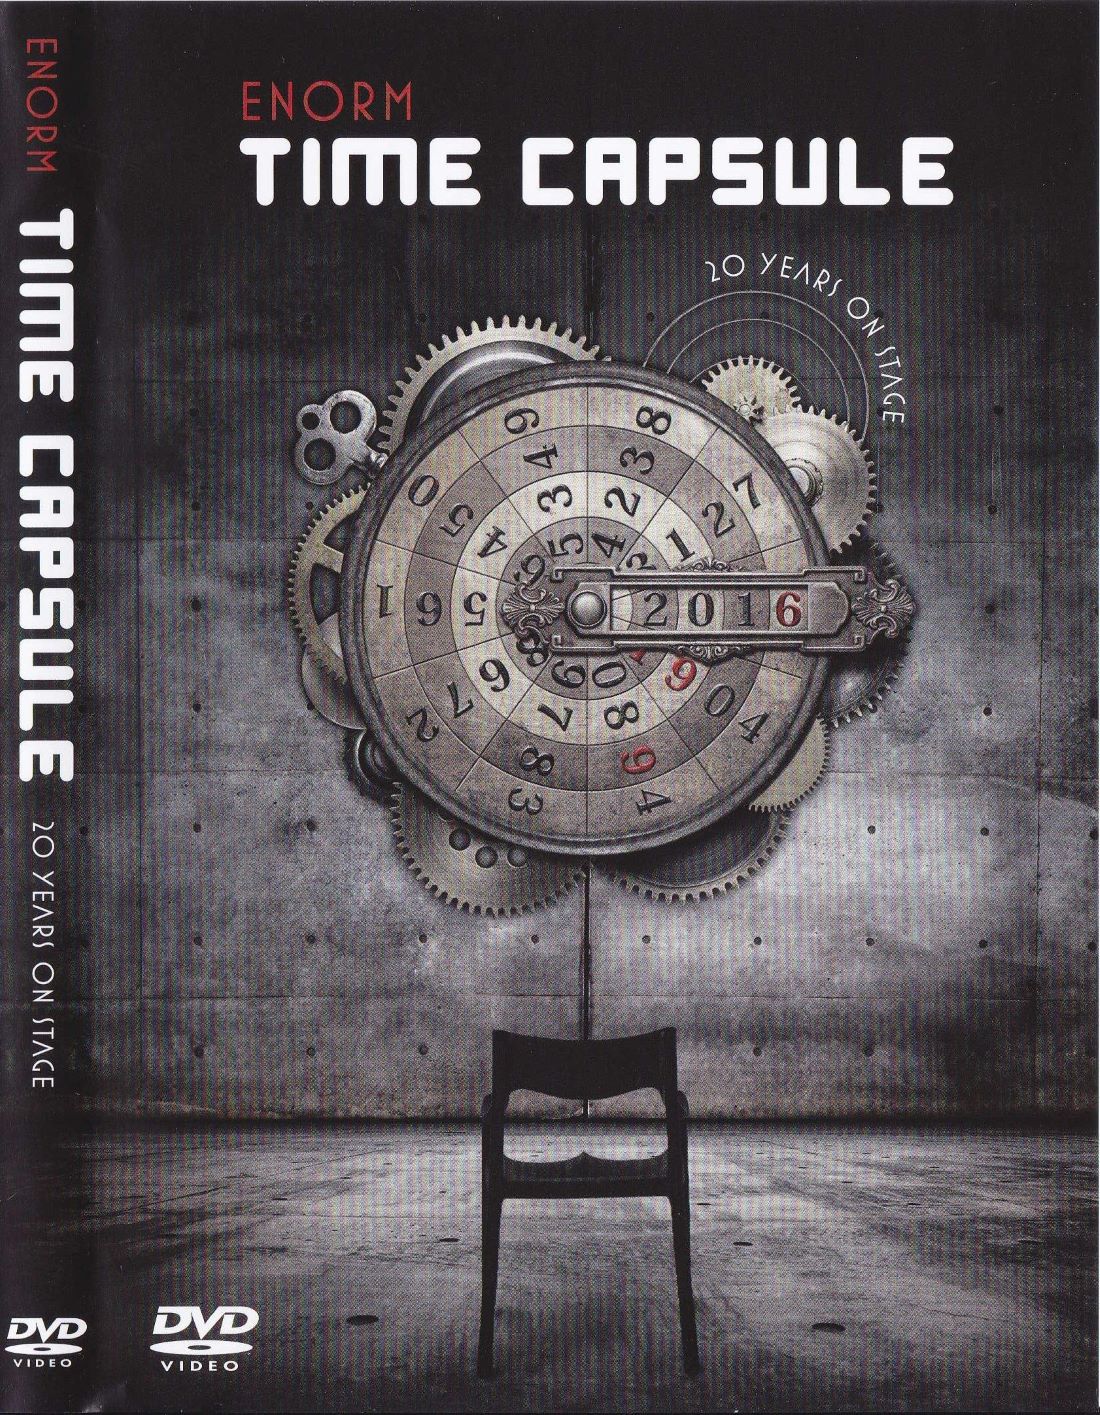 ENORM - Time Capsule 20 Years On Stage (2016) (2xDVD5)